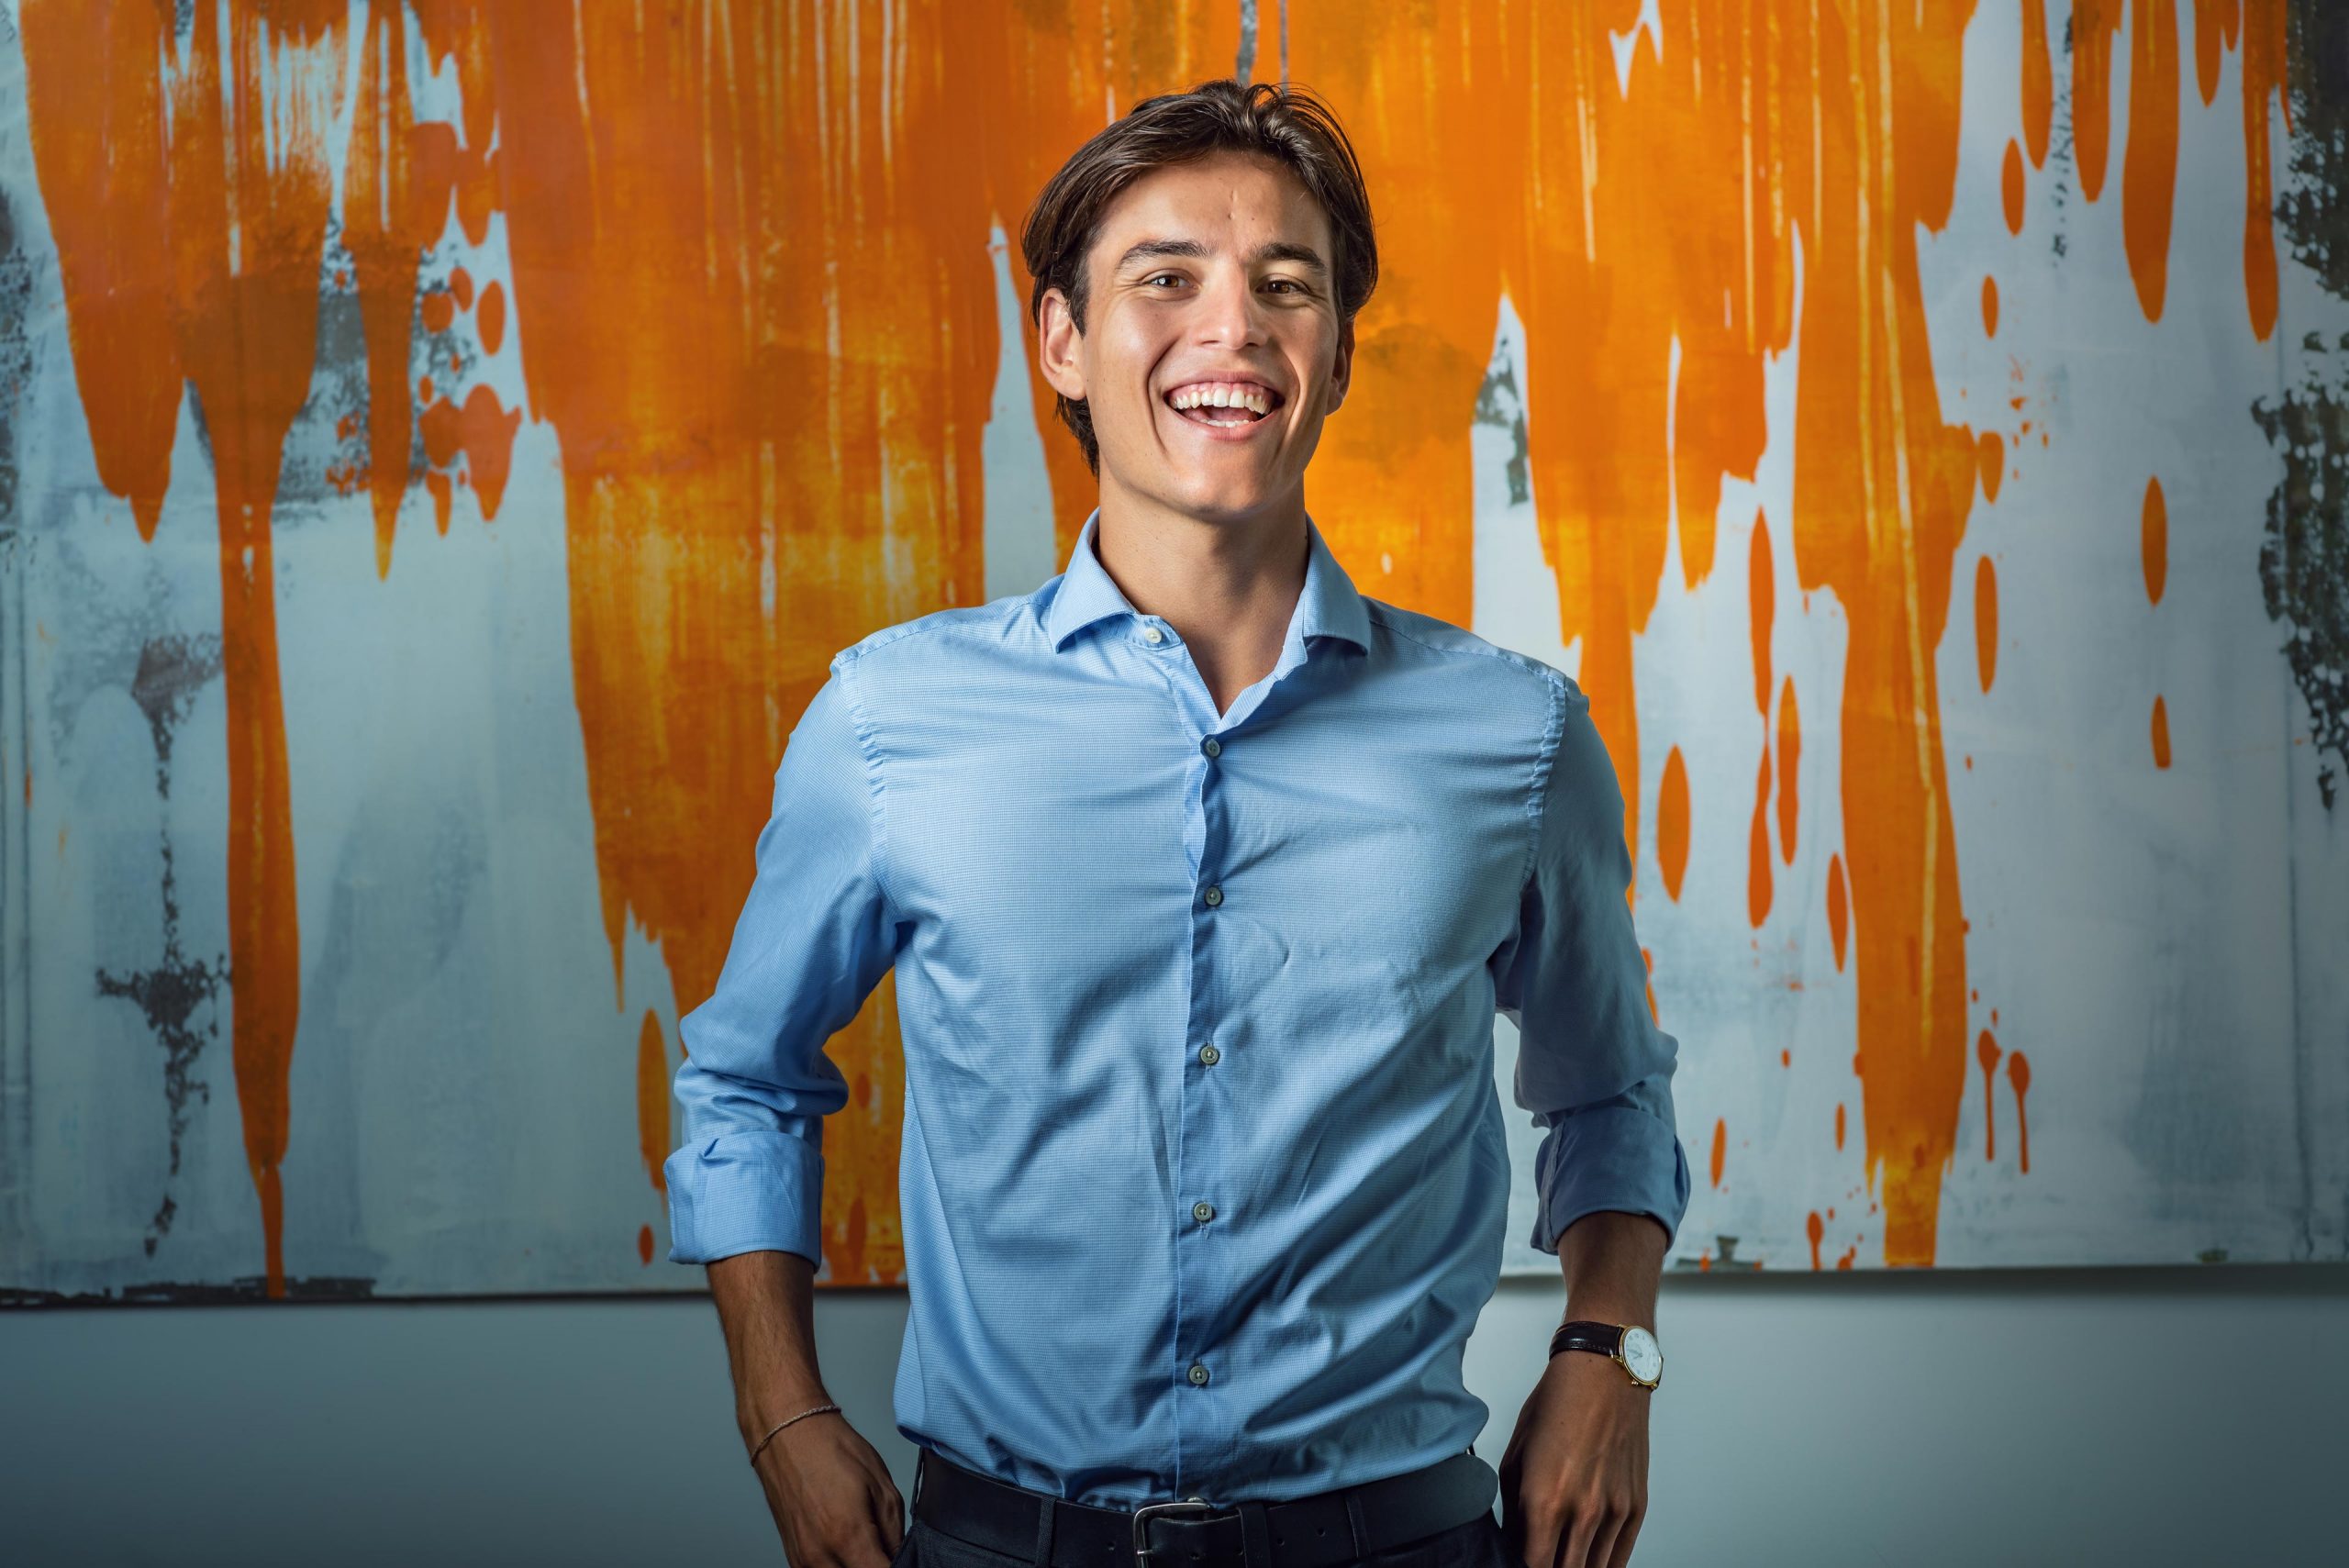 A handsome young man smiles for his LinkedIn professional portrait with beautiful artwork in the background, captured by Wright Content, a LinkedIn headshot photographer in London.